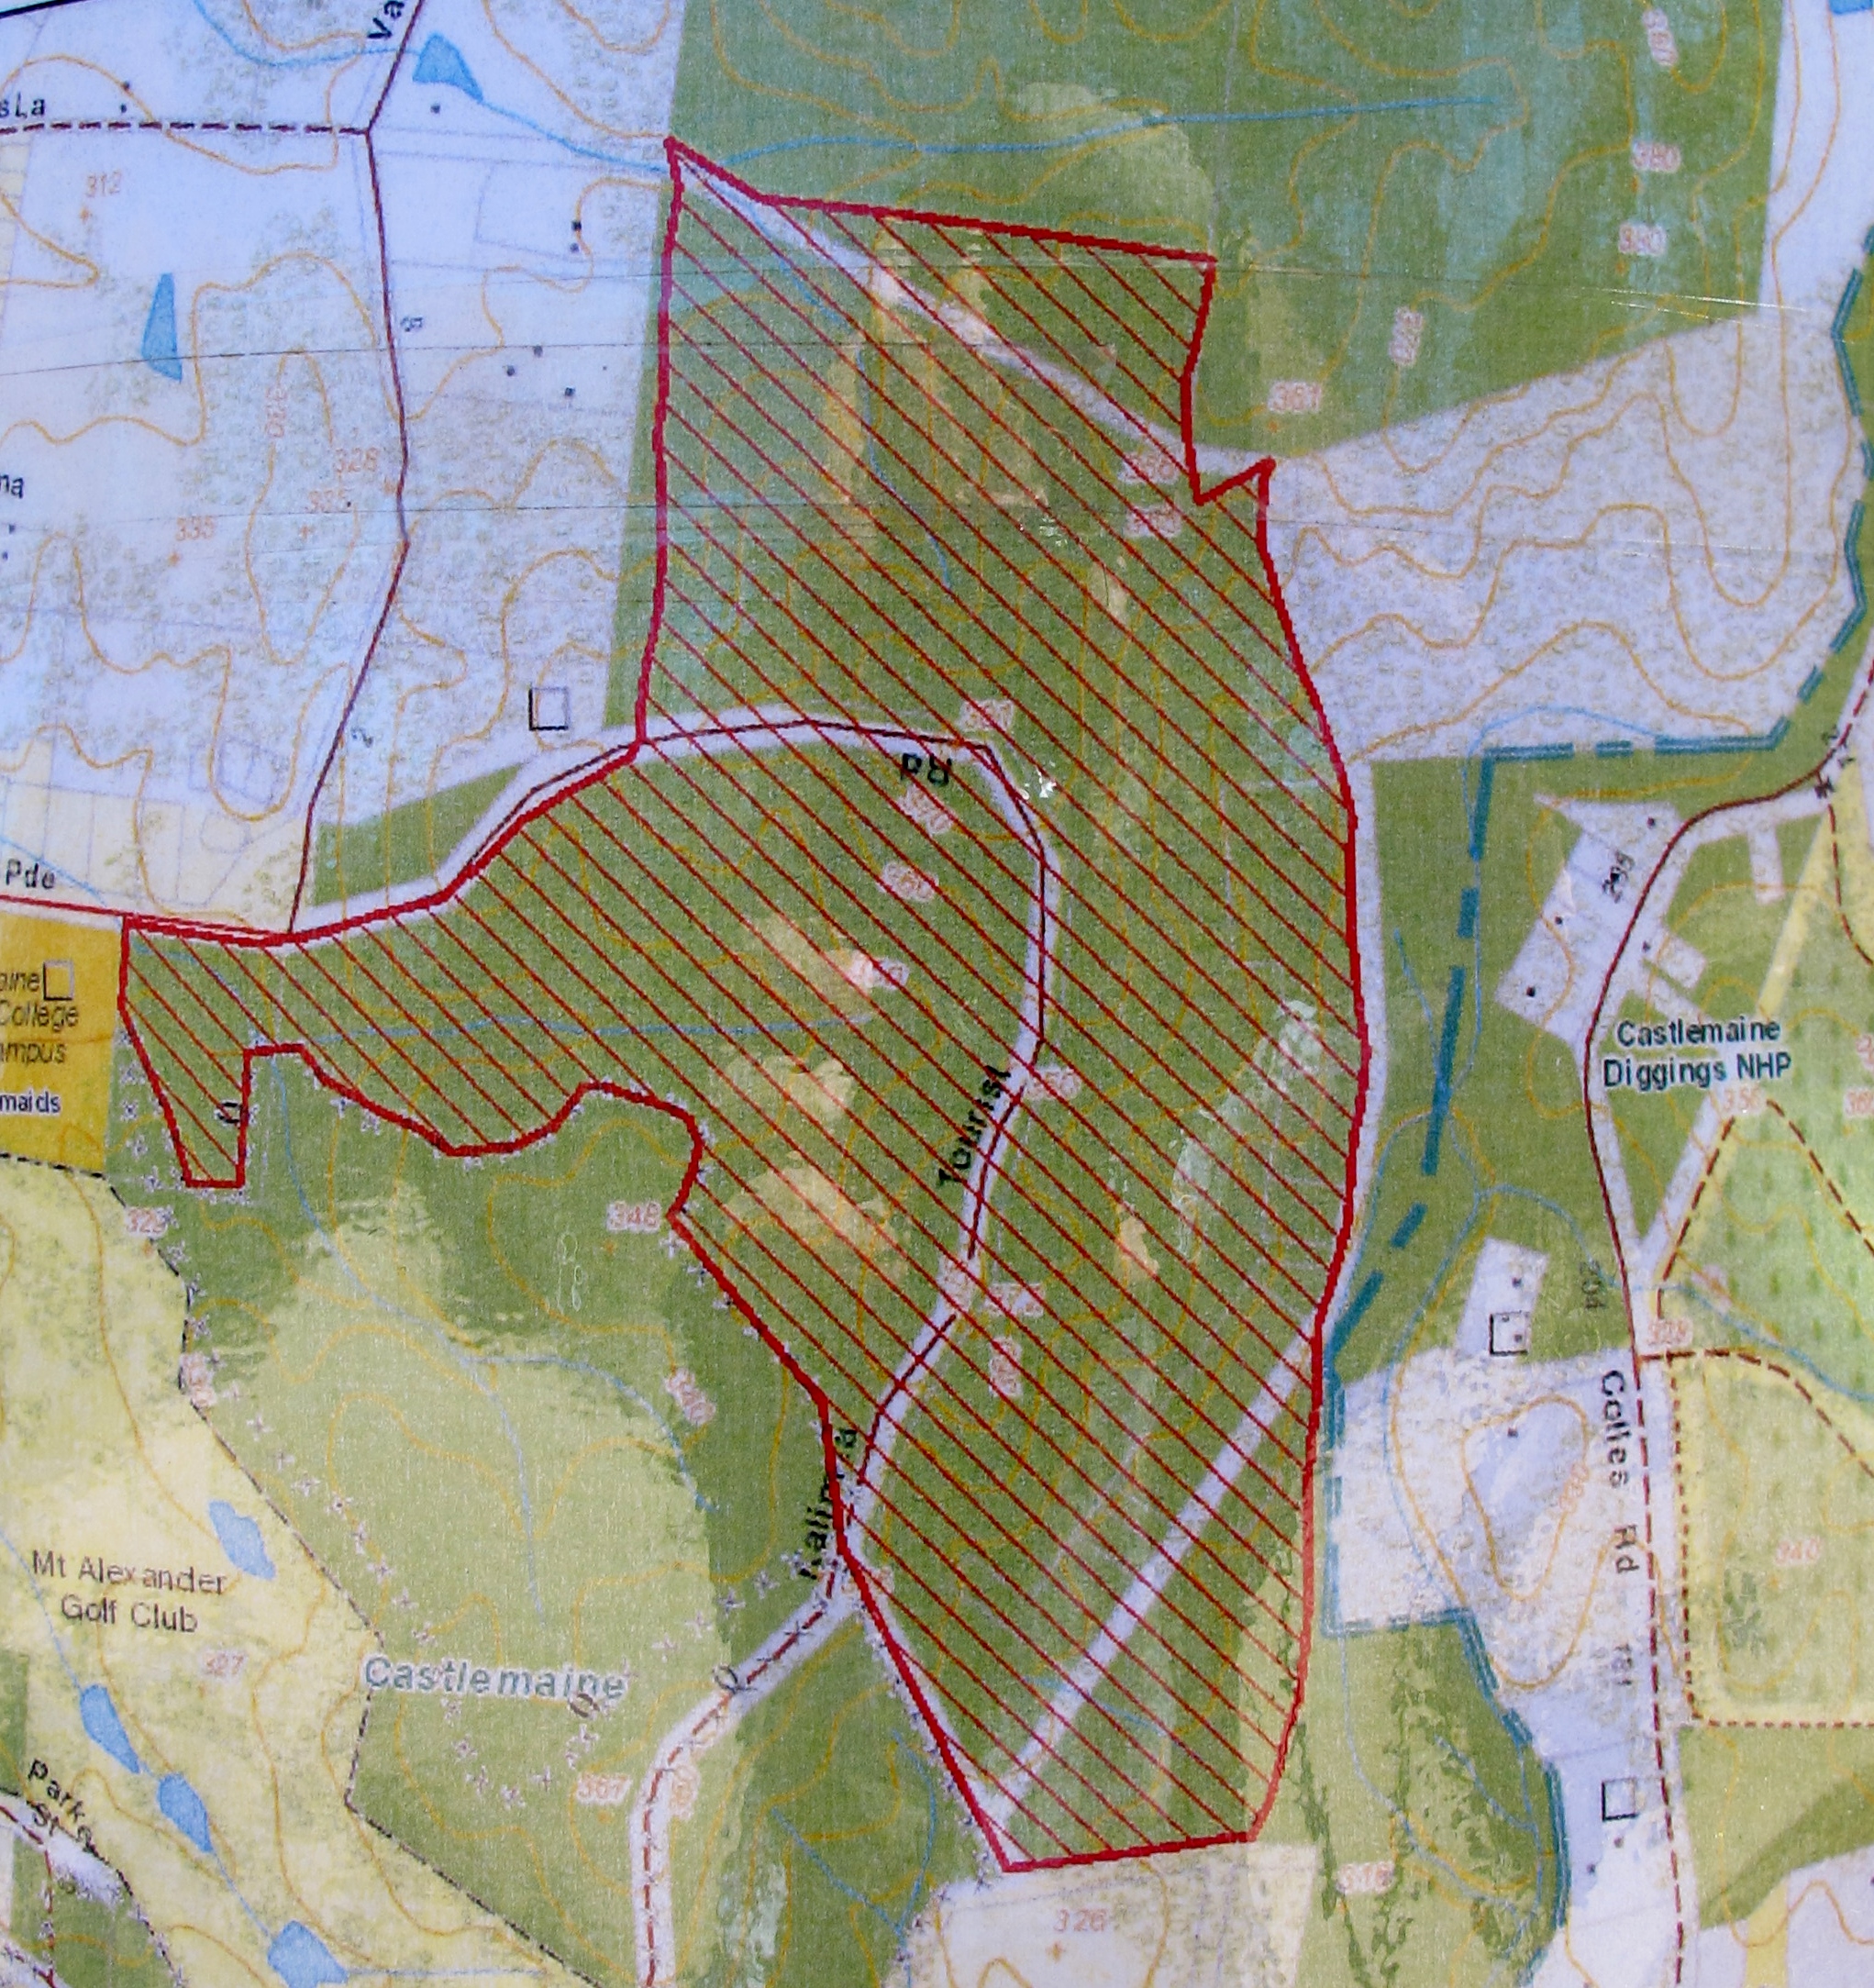 Proposed burn area. It's centred on the Tourist road, and includes the area burned in 2009